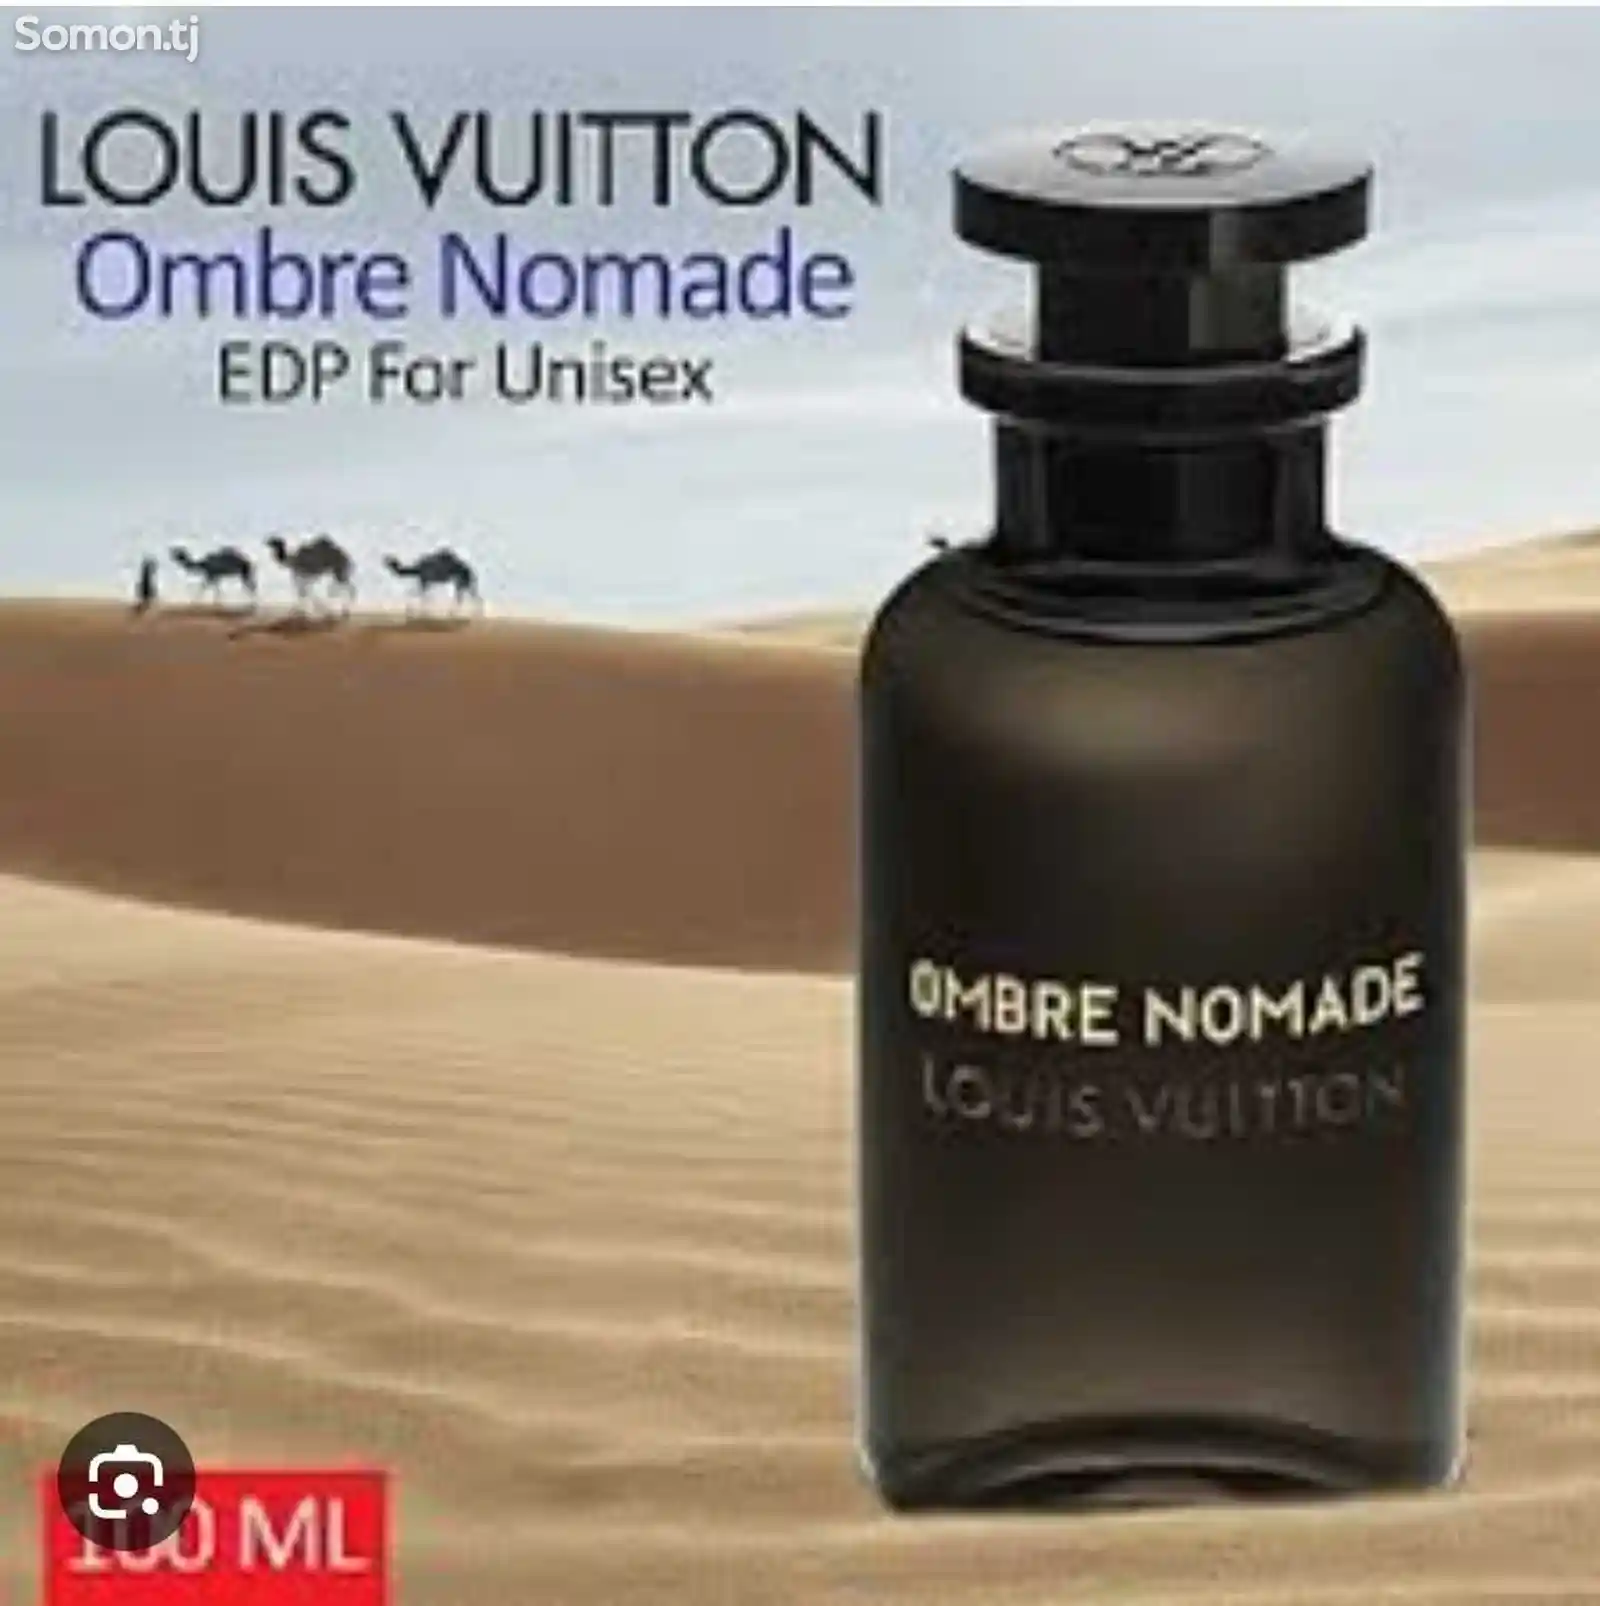 Парфюм Luis Vuitton ombre nomade-1